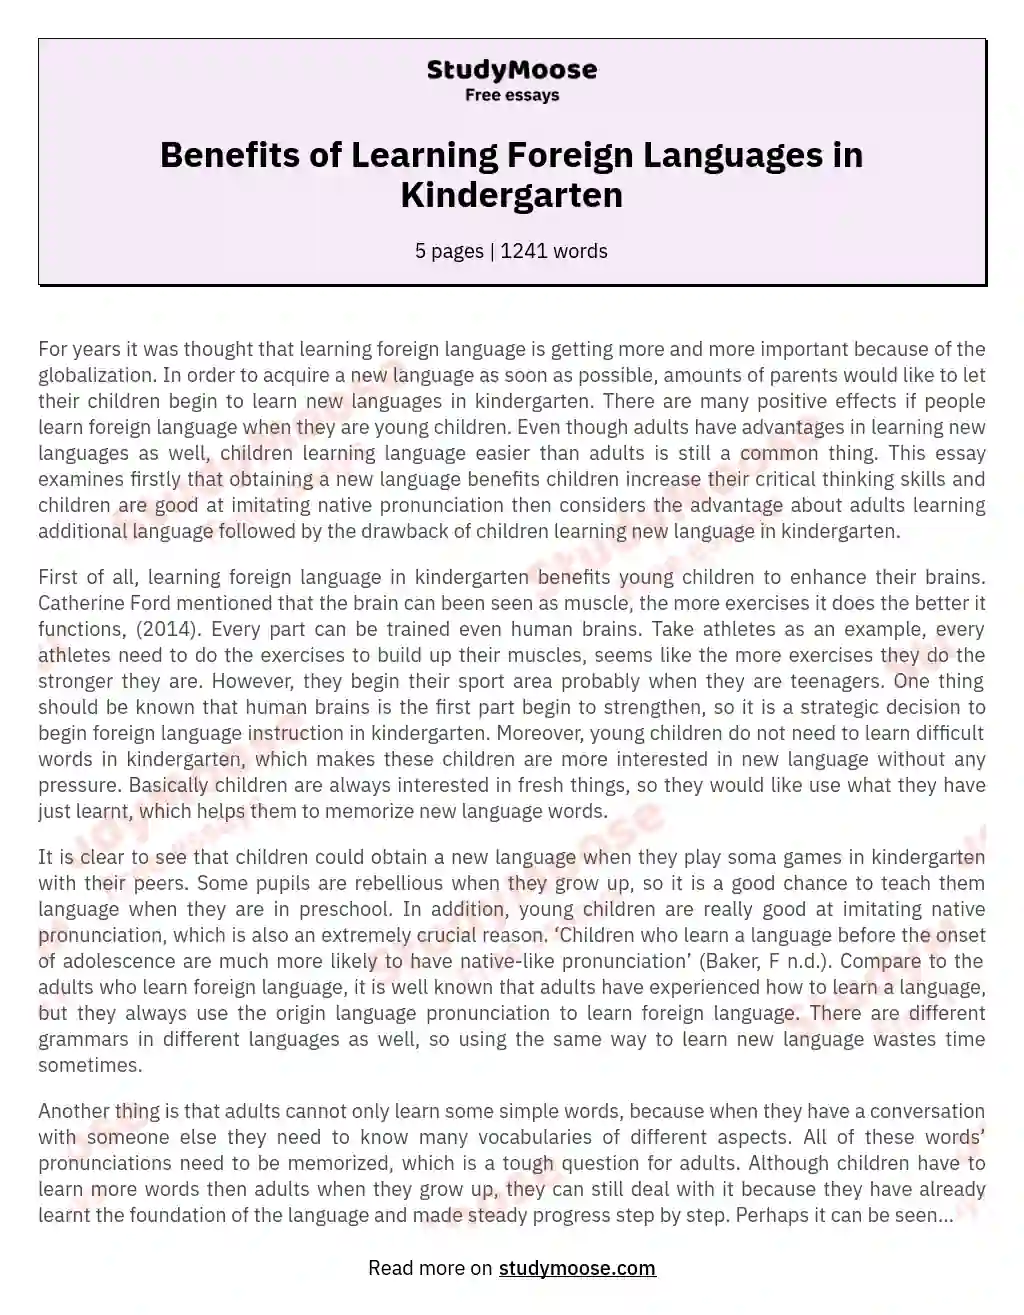 Benefits of Learning Foreign Languages in Kindergarten essay